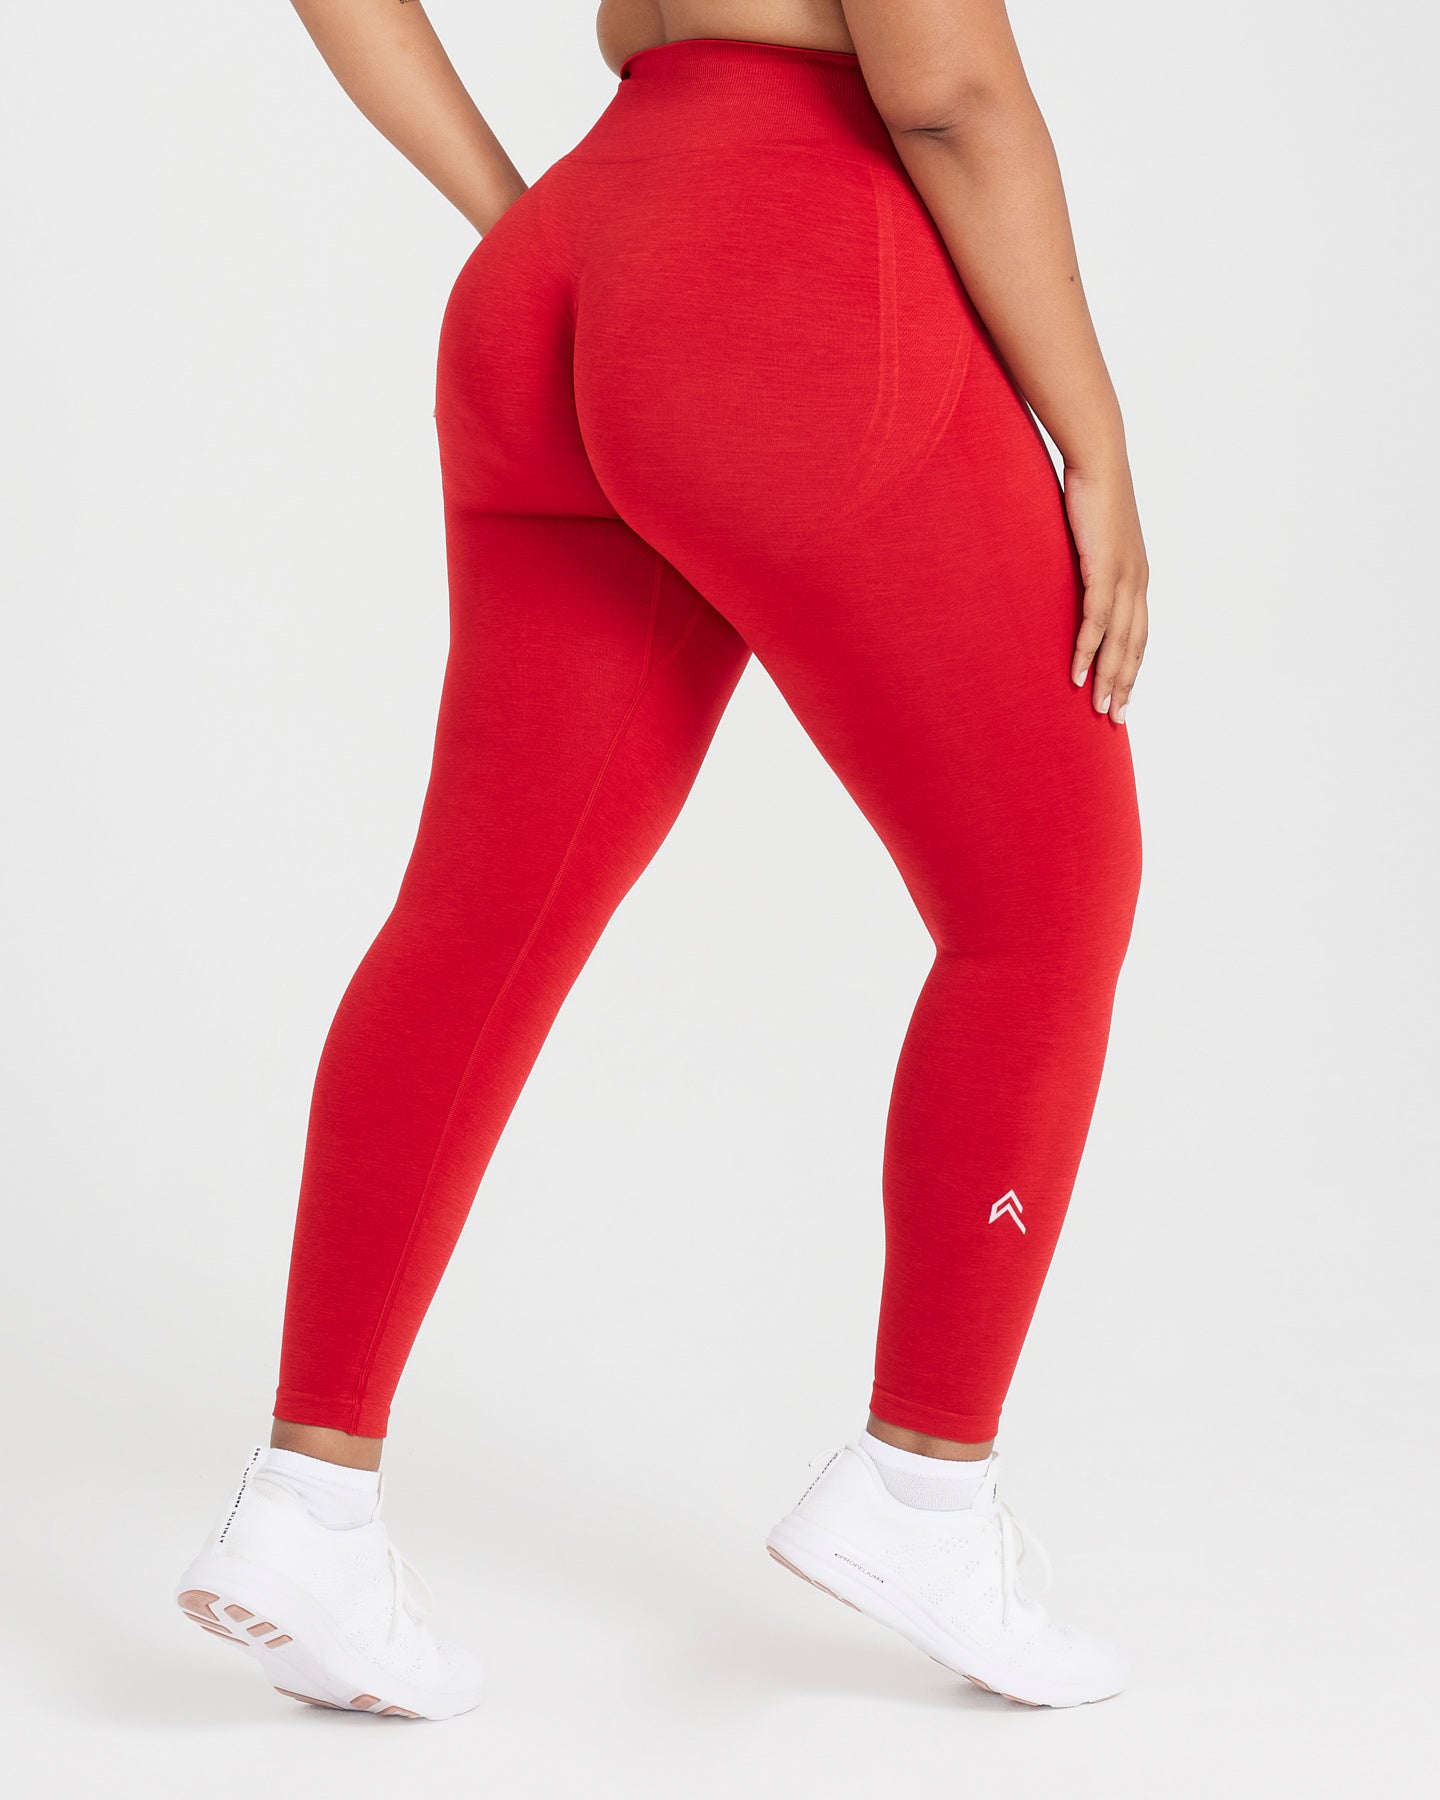 Leggings Seamless Squat Proof 1.0 - Red – New Fitness USA